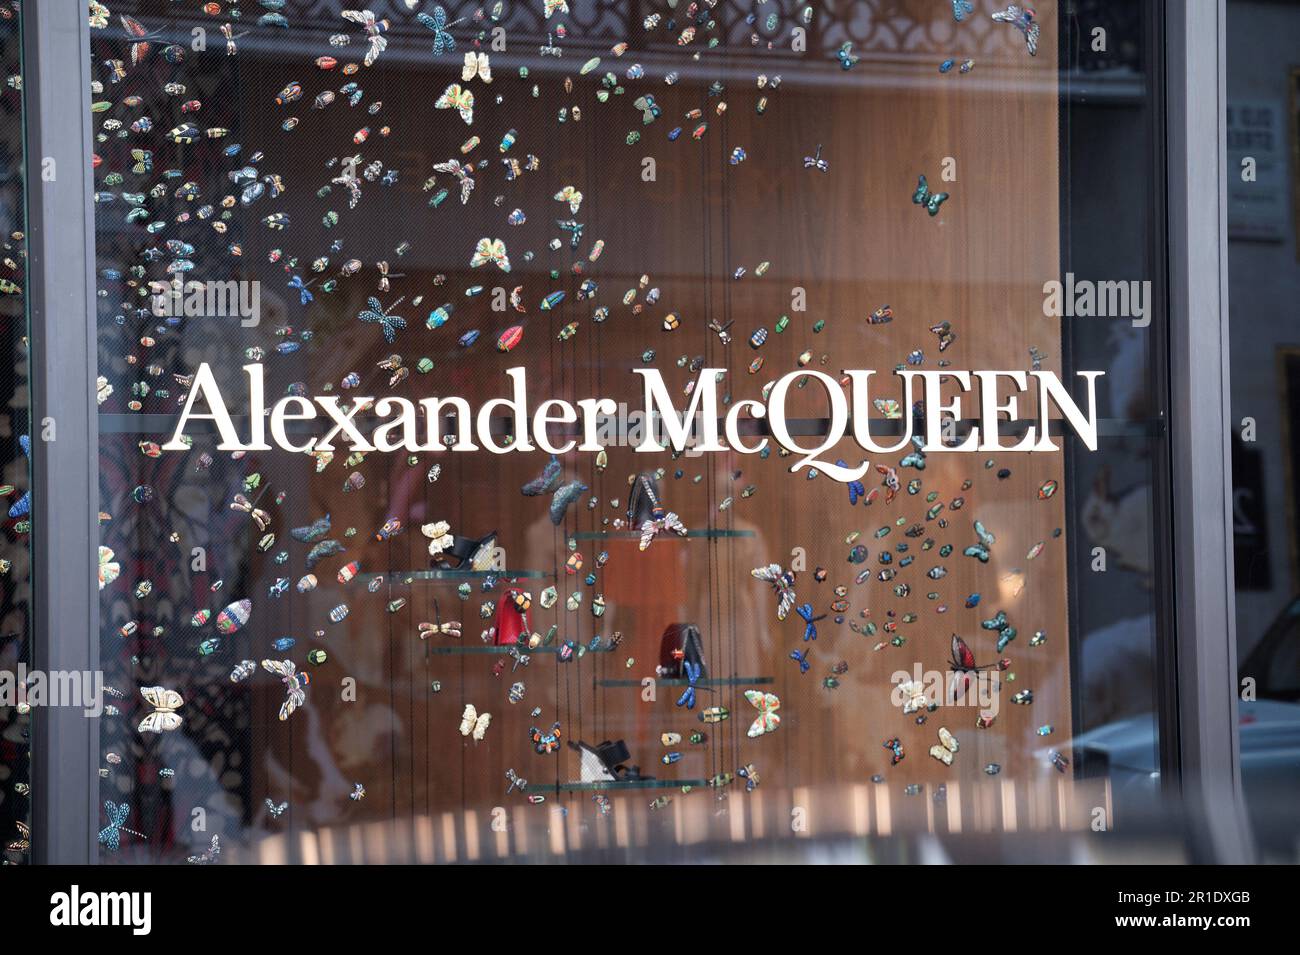 The Alexander McQueen fashion store on Old Bond Street in Mayfair London  Stock Photo - Alamy